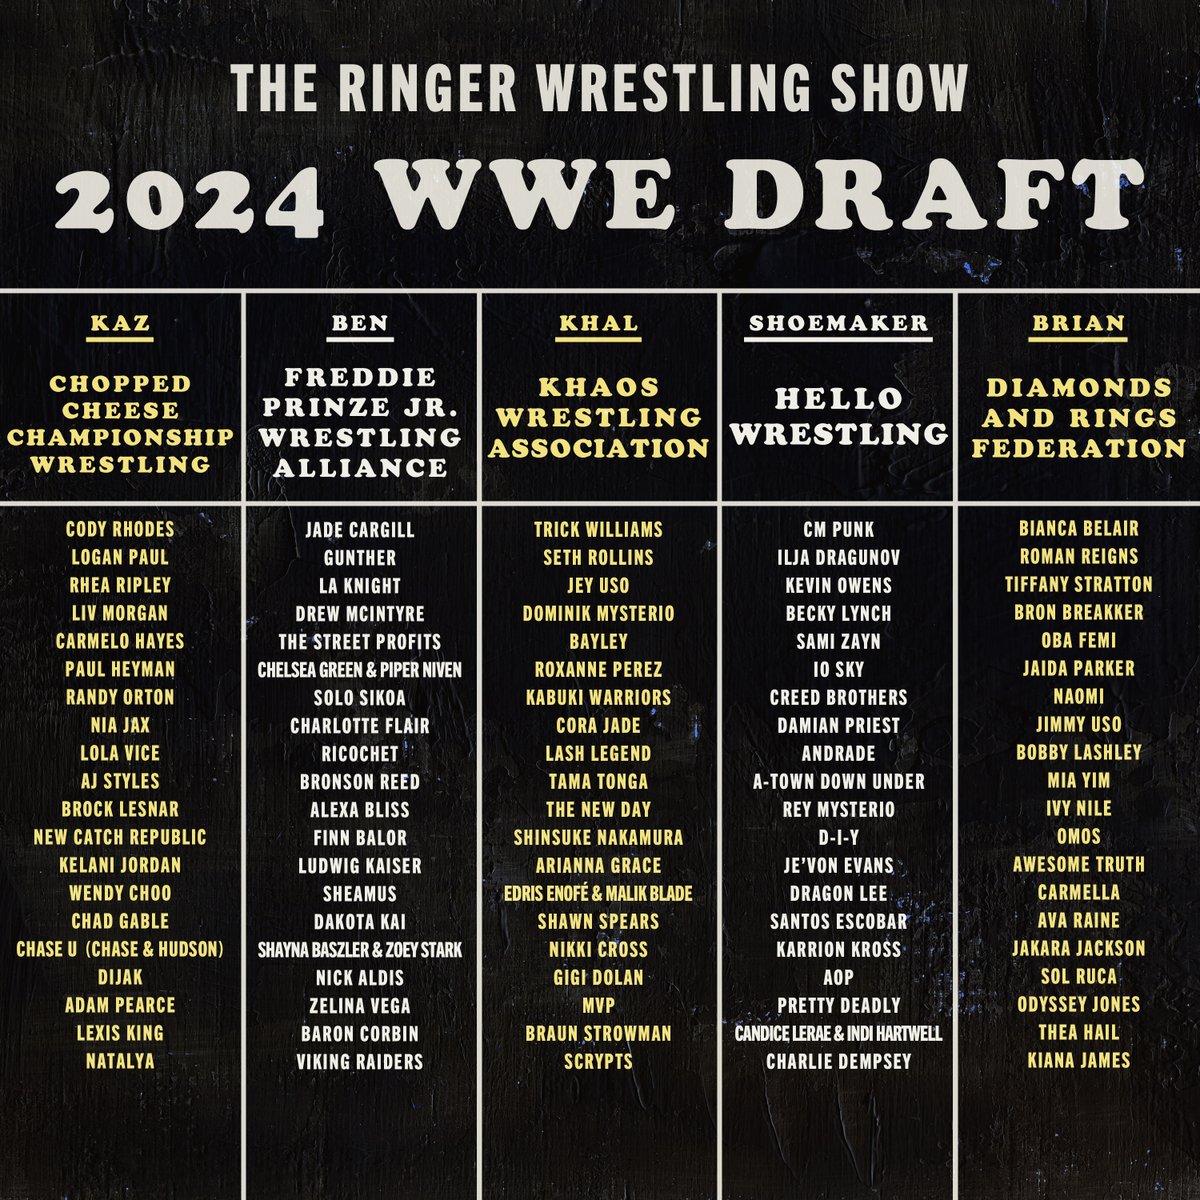 Now presenting the 2024 Ringer Wrestling Show WWE Draft results. Tell us who had the best company name and roster. @Kazeem @cruzkontrol @khal @DavidShoemaker @brianhwaters